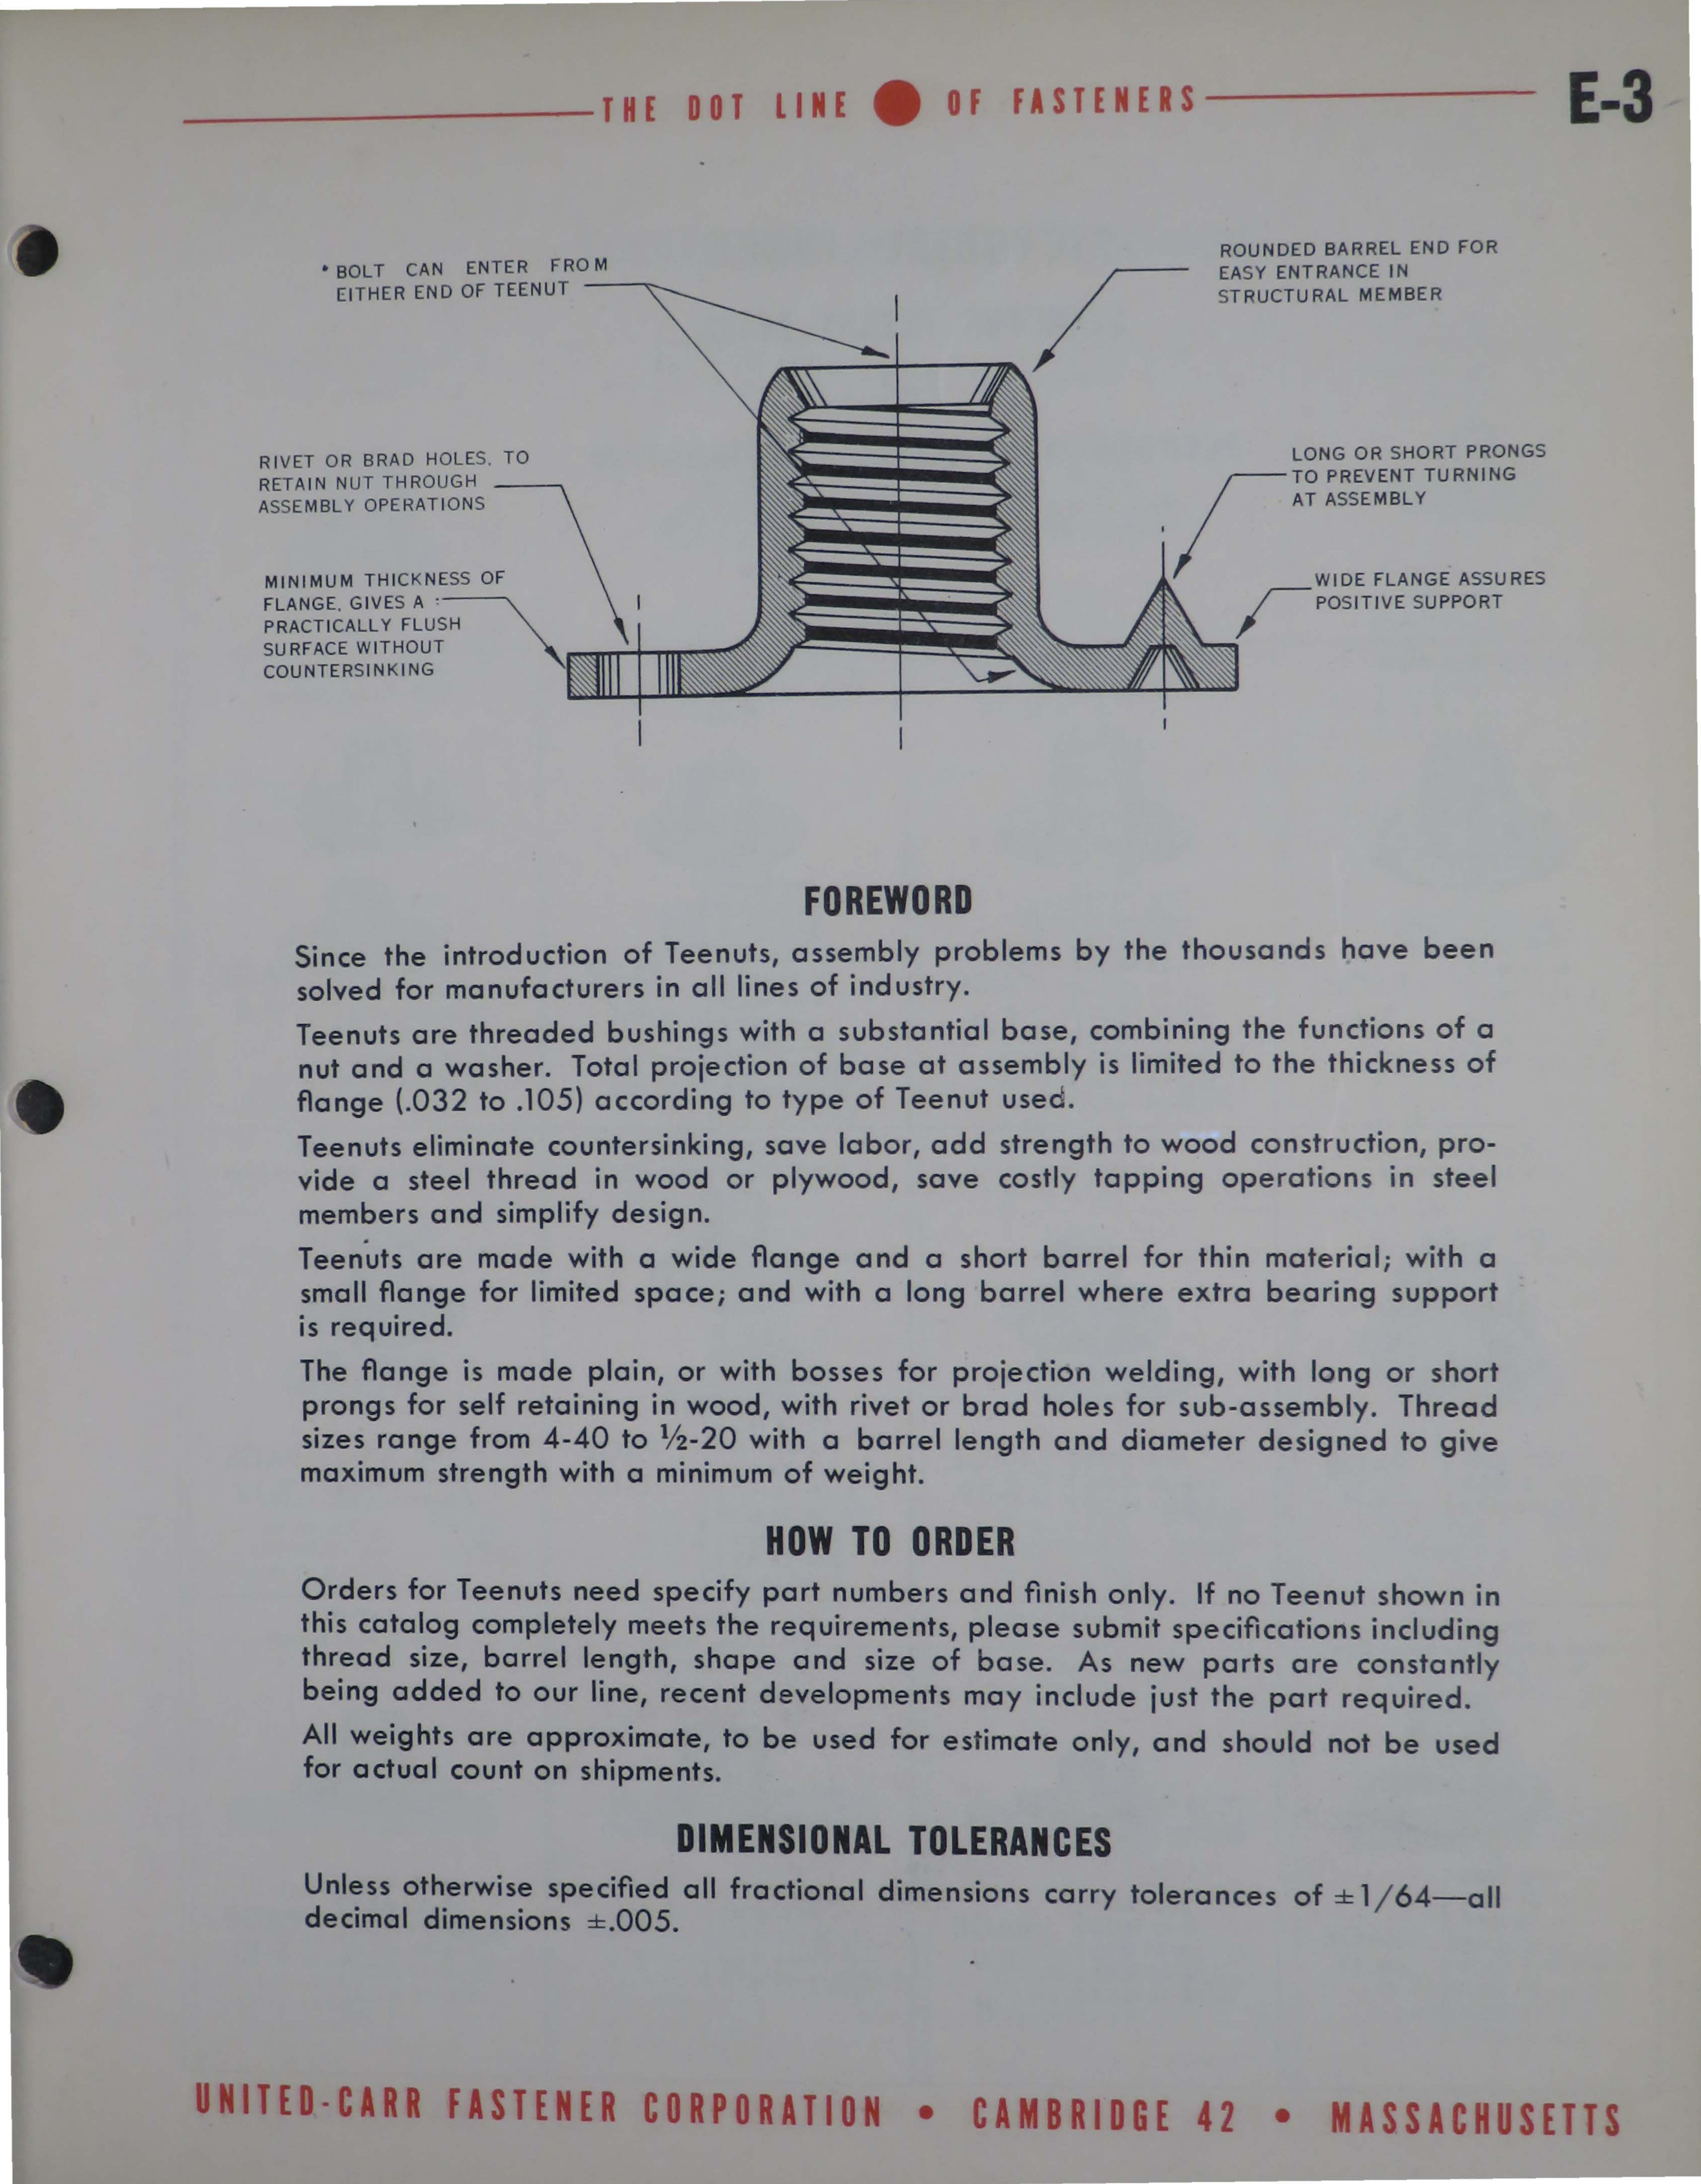 Sample page 5 from AirCorps Library document: Engineering Data Catalog for DOT Teenuts for Plywood, Wood and Metal Construction